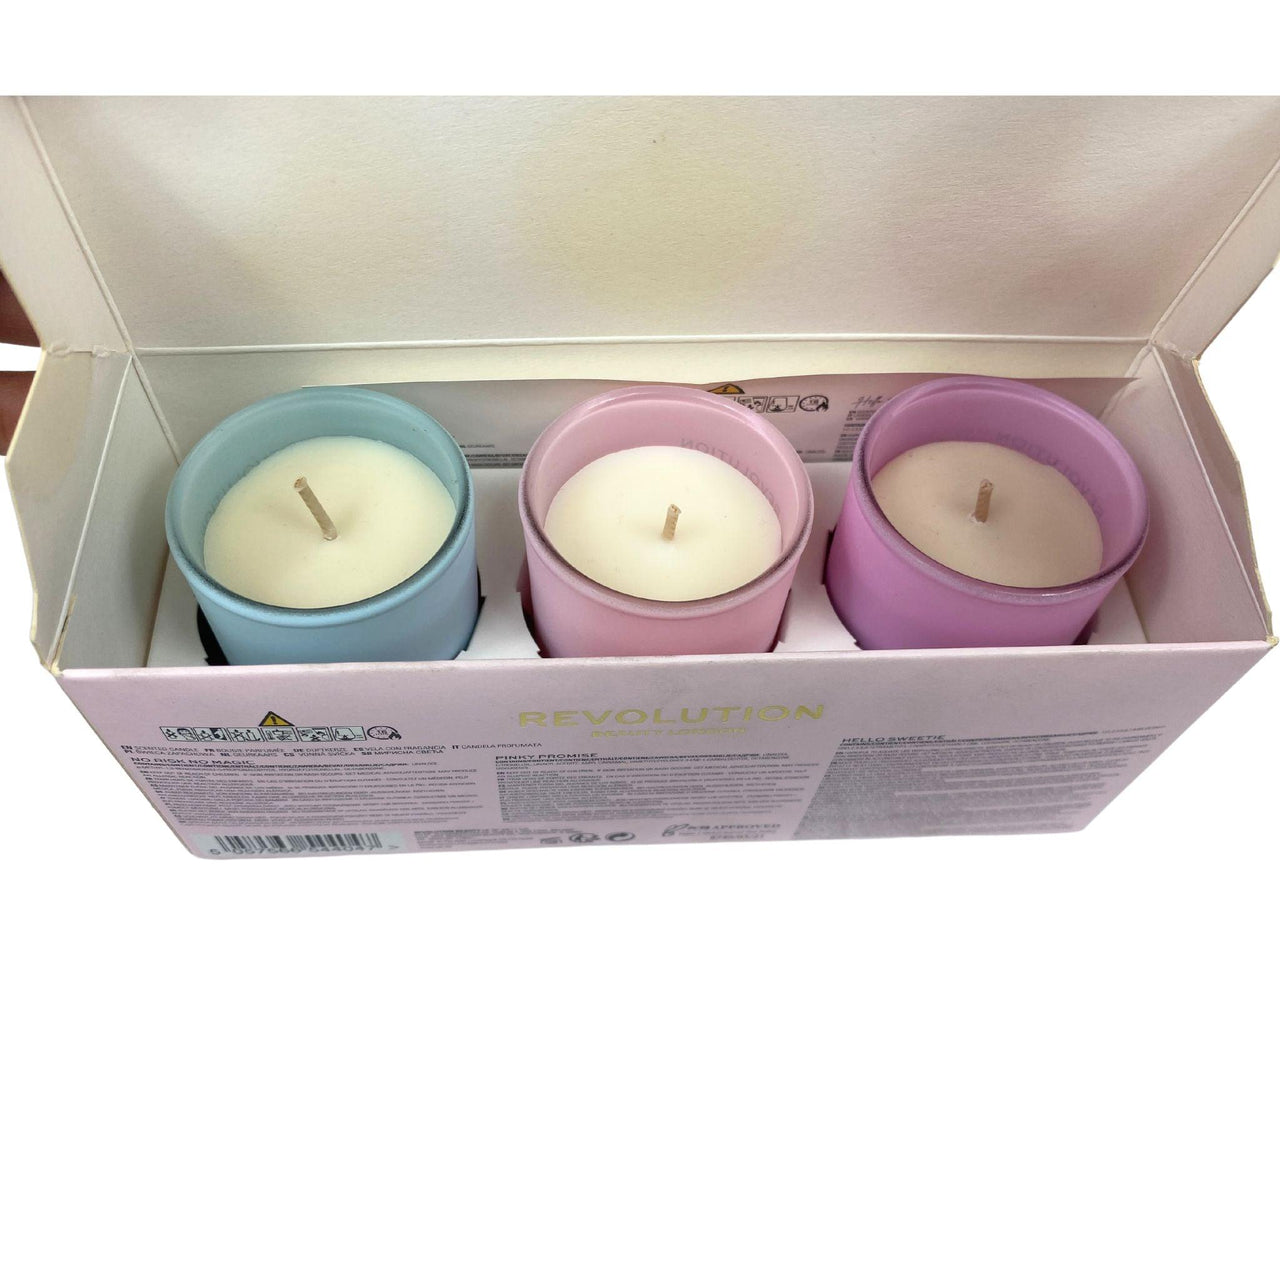 Revolution Awakening Collection Mini Scented Candle Trio (12 Pcs Lot) - Discount Wholesalers Inc